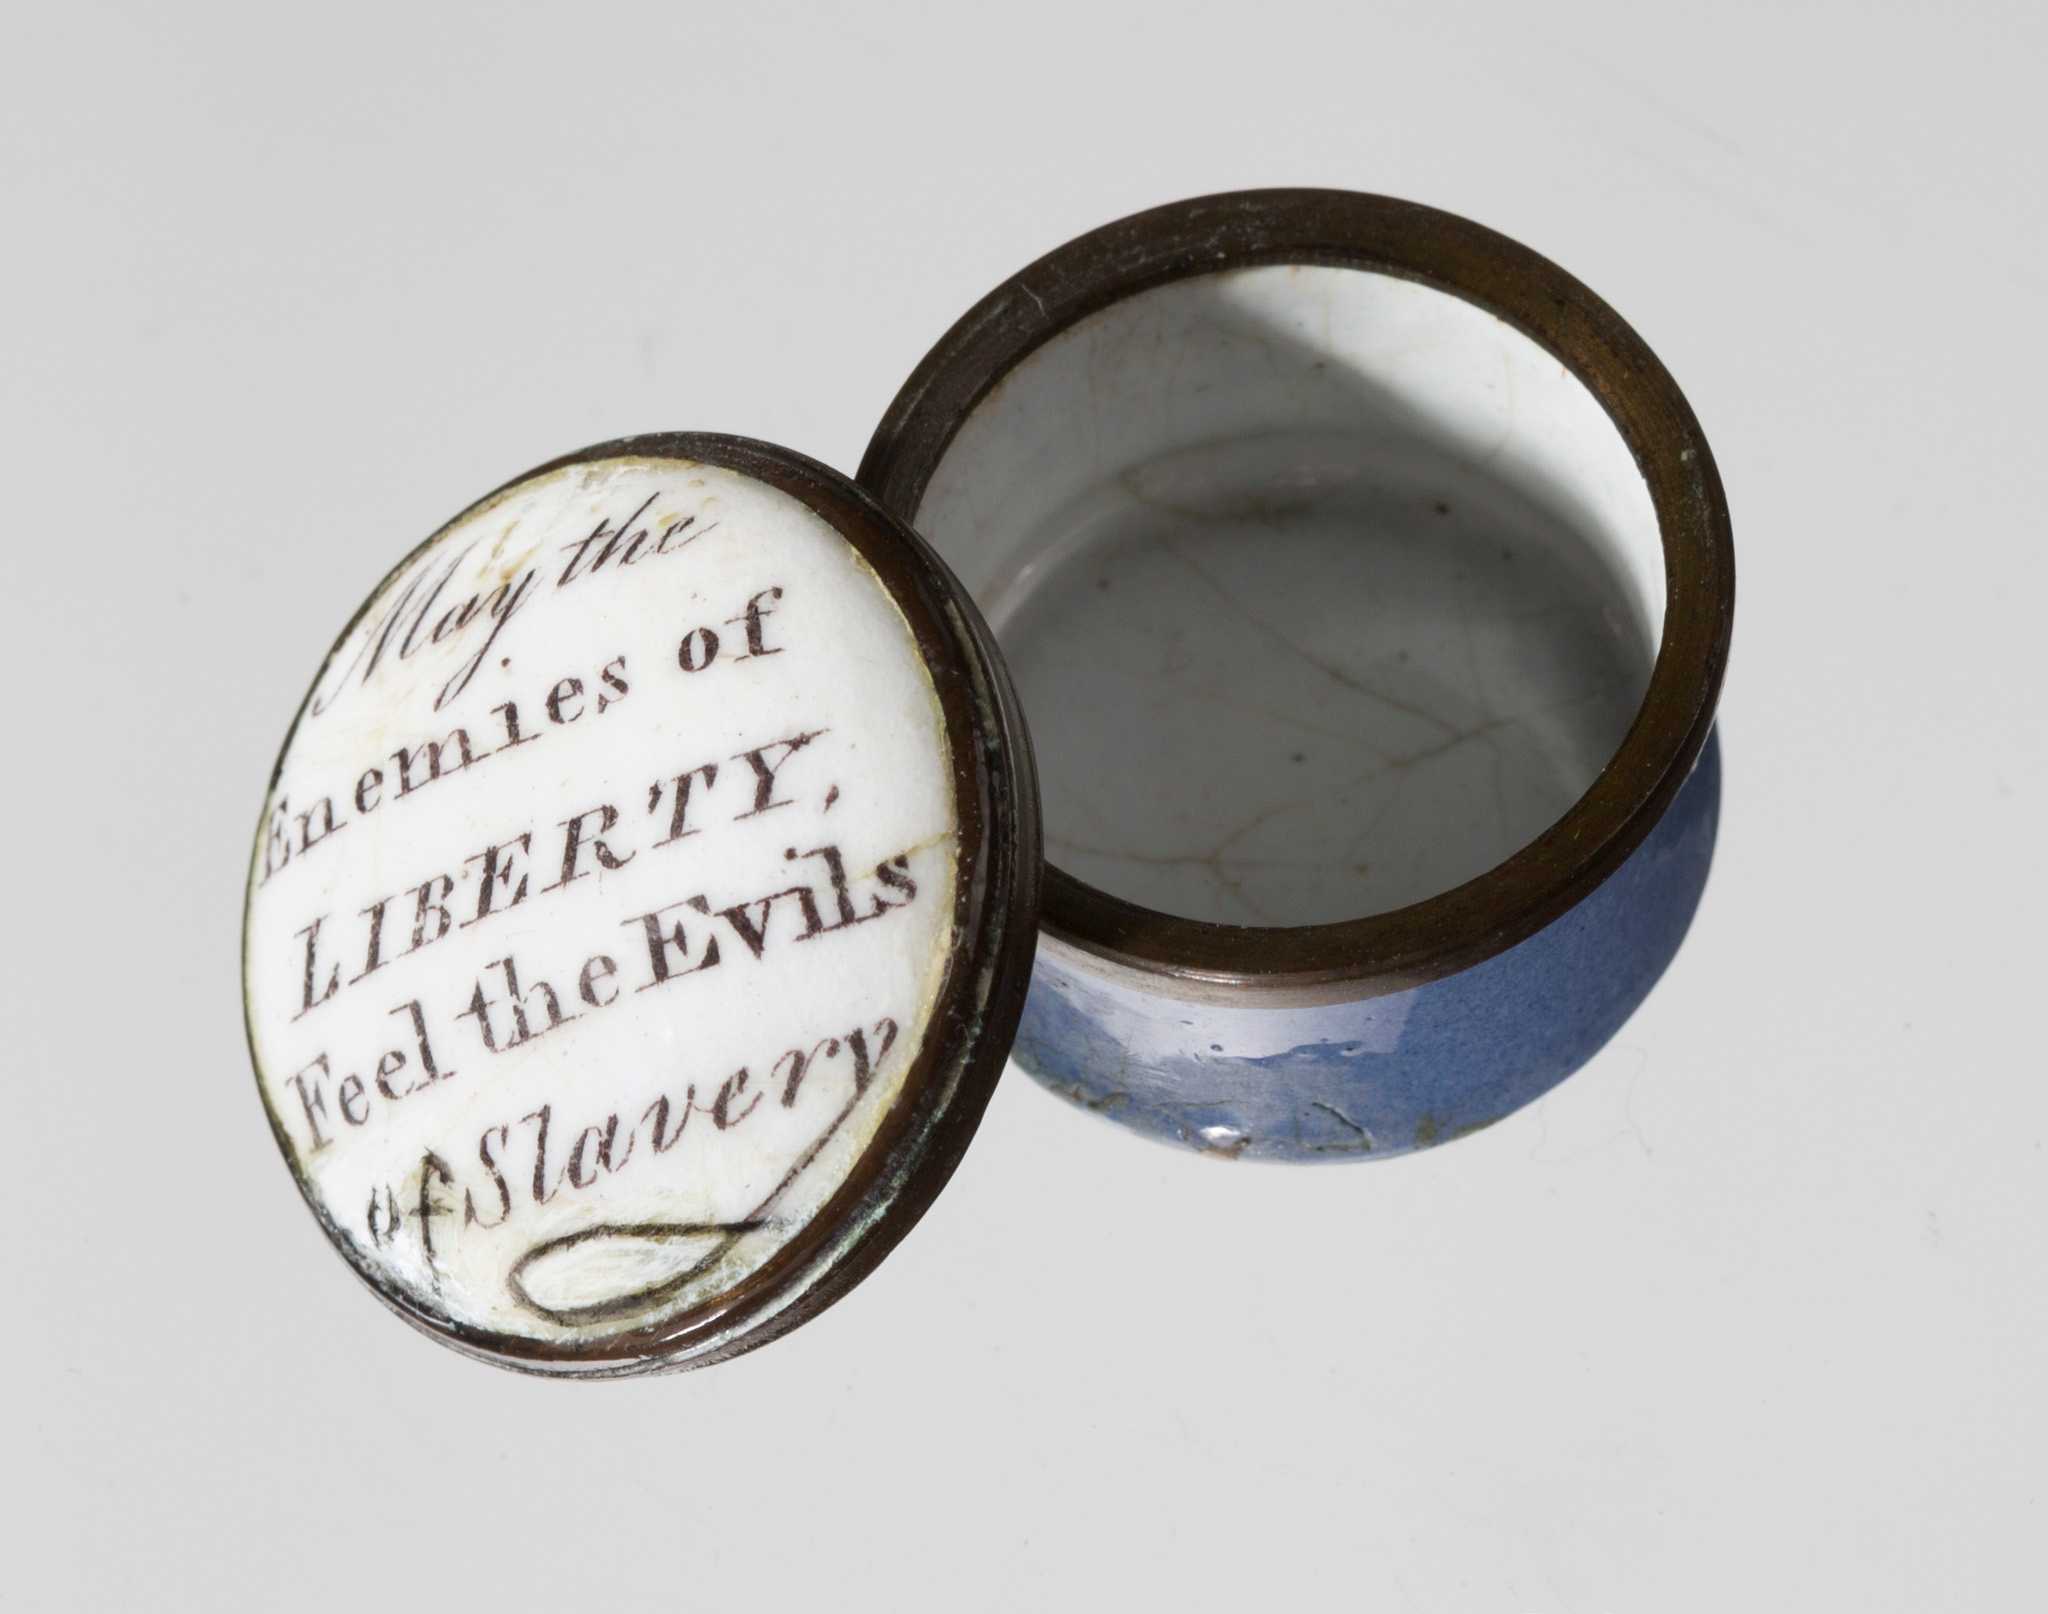 A round, blue, white and black enamel container with a removable lid. The lid of the container is white. Written in black script on the lid of the container is "May the Enemies of LIBERTY, Feel the Evils of Slavery." The outside of the container is light blue, with a black rim. The inside is white.